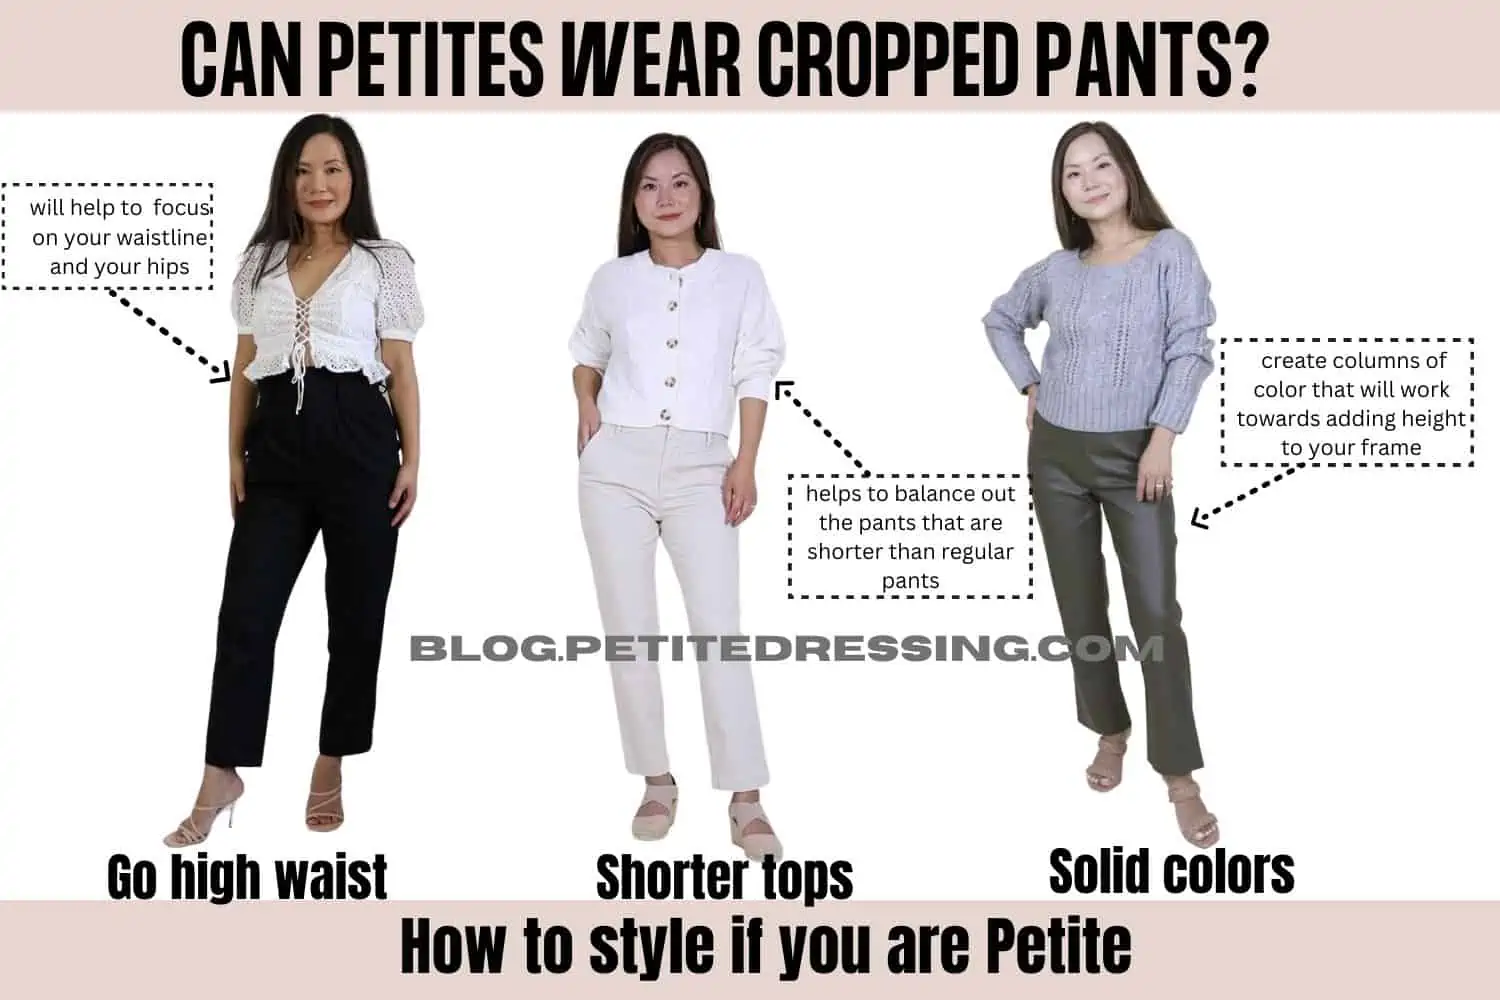 Can Petites Wear Cropped Pants? - Petite Dressing